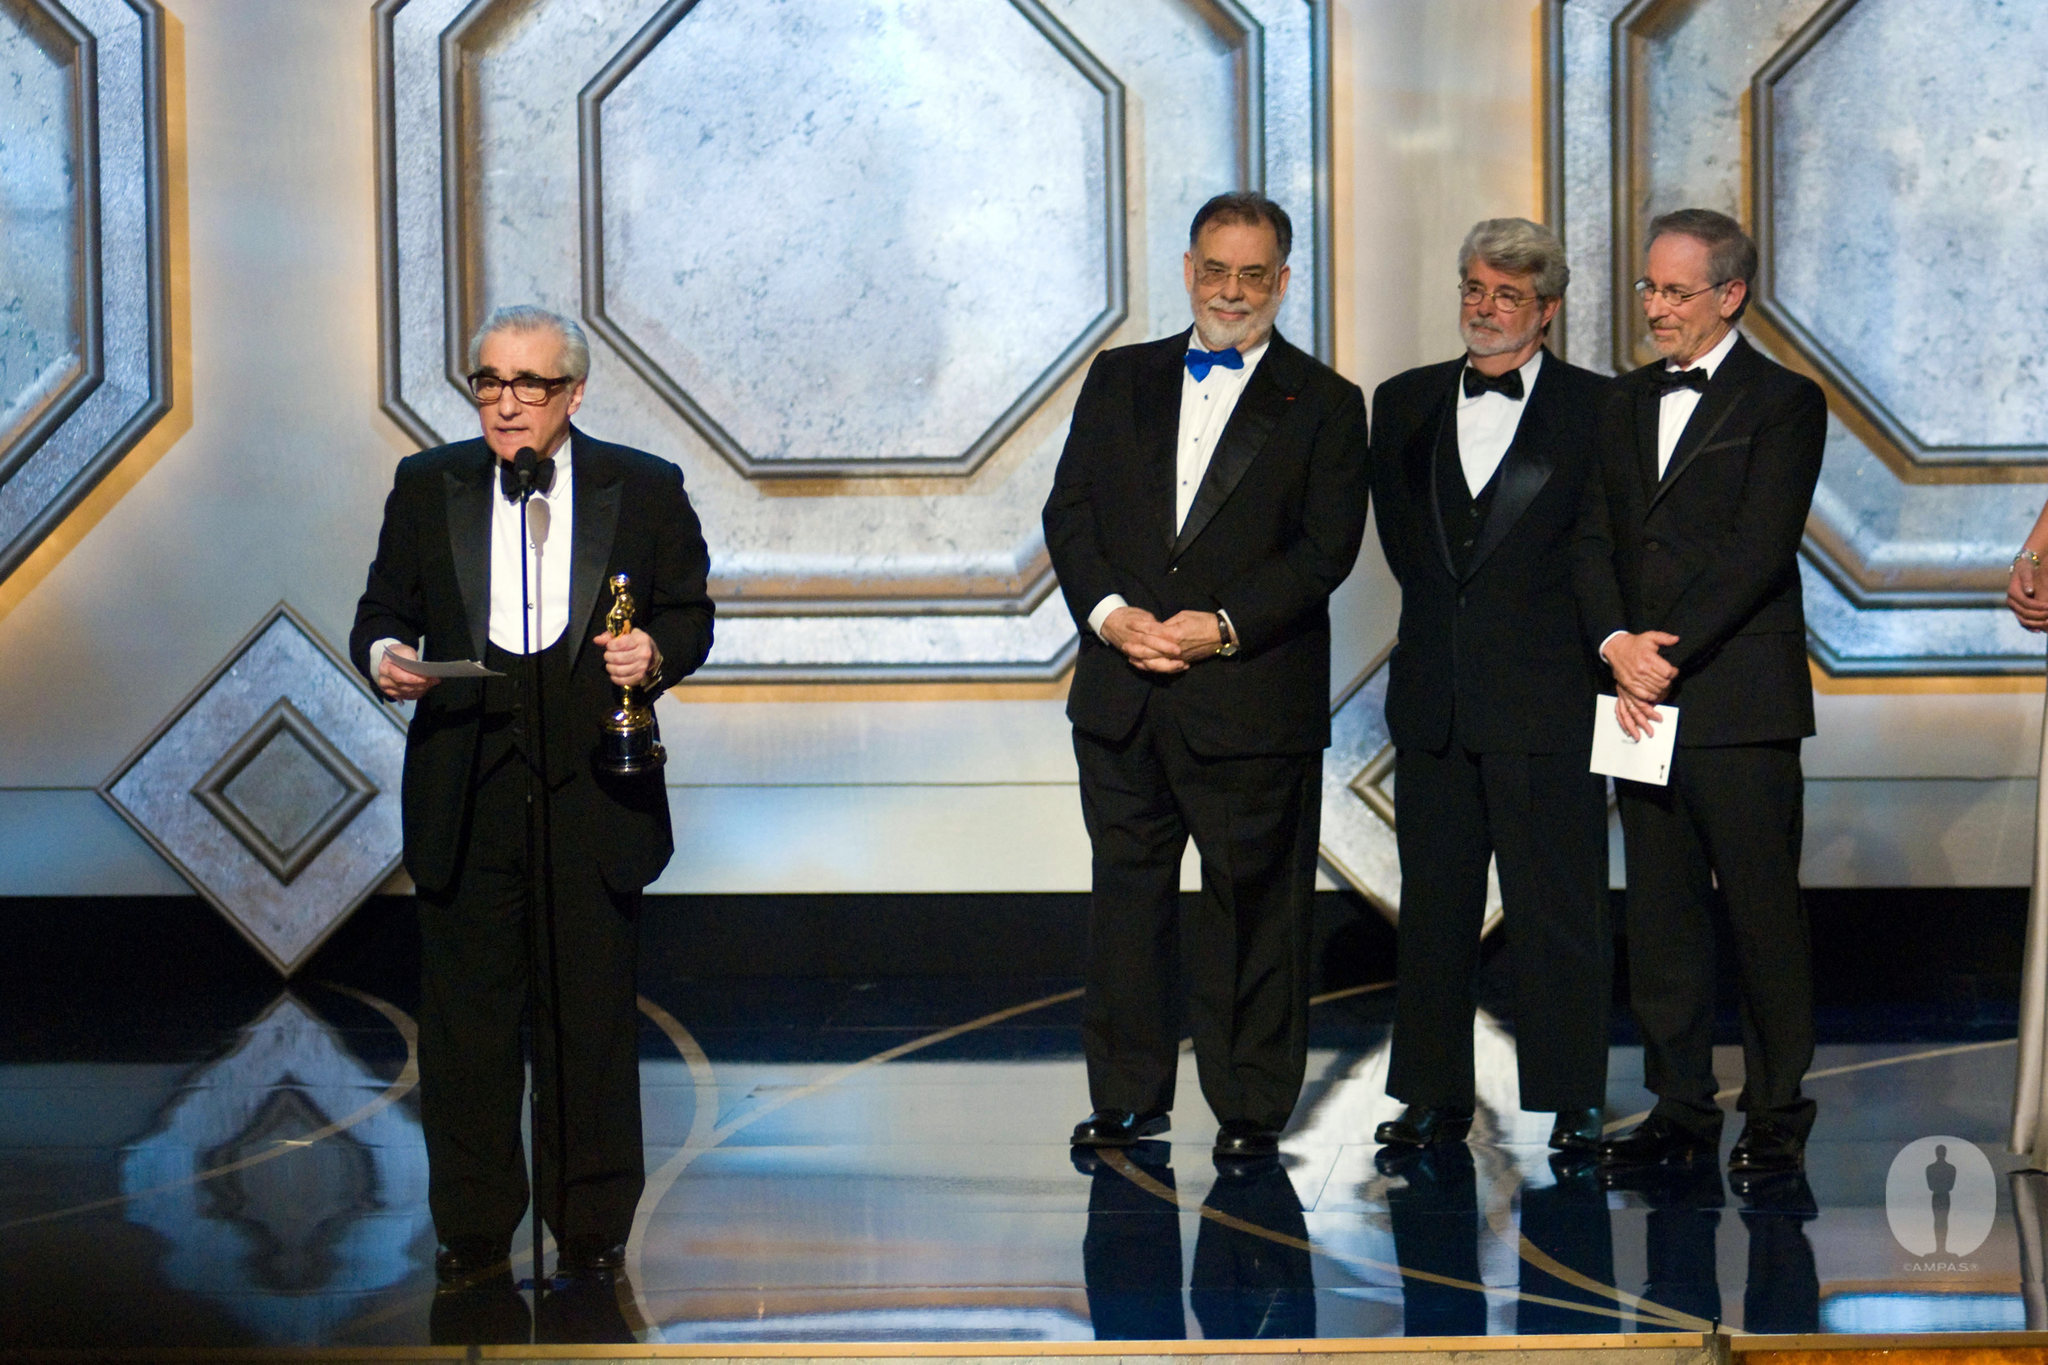 George Lucas, Martin Scorsese, Steven Spielberg and Francis Ford Coppola at event of The 79th Annual Academy Awards (2007)